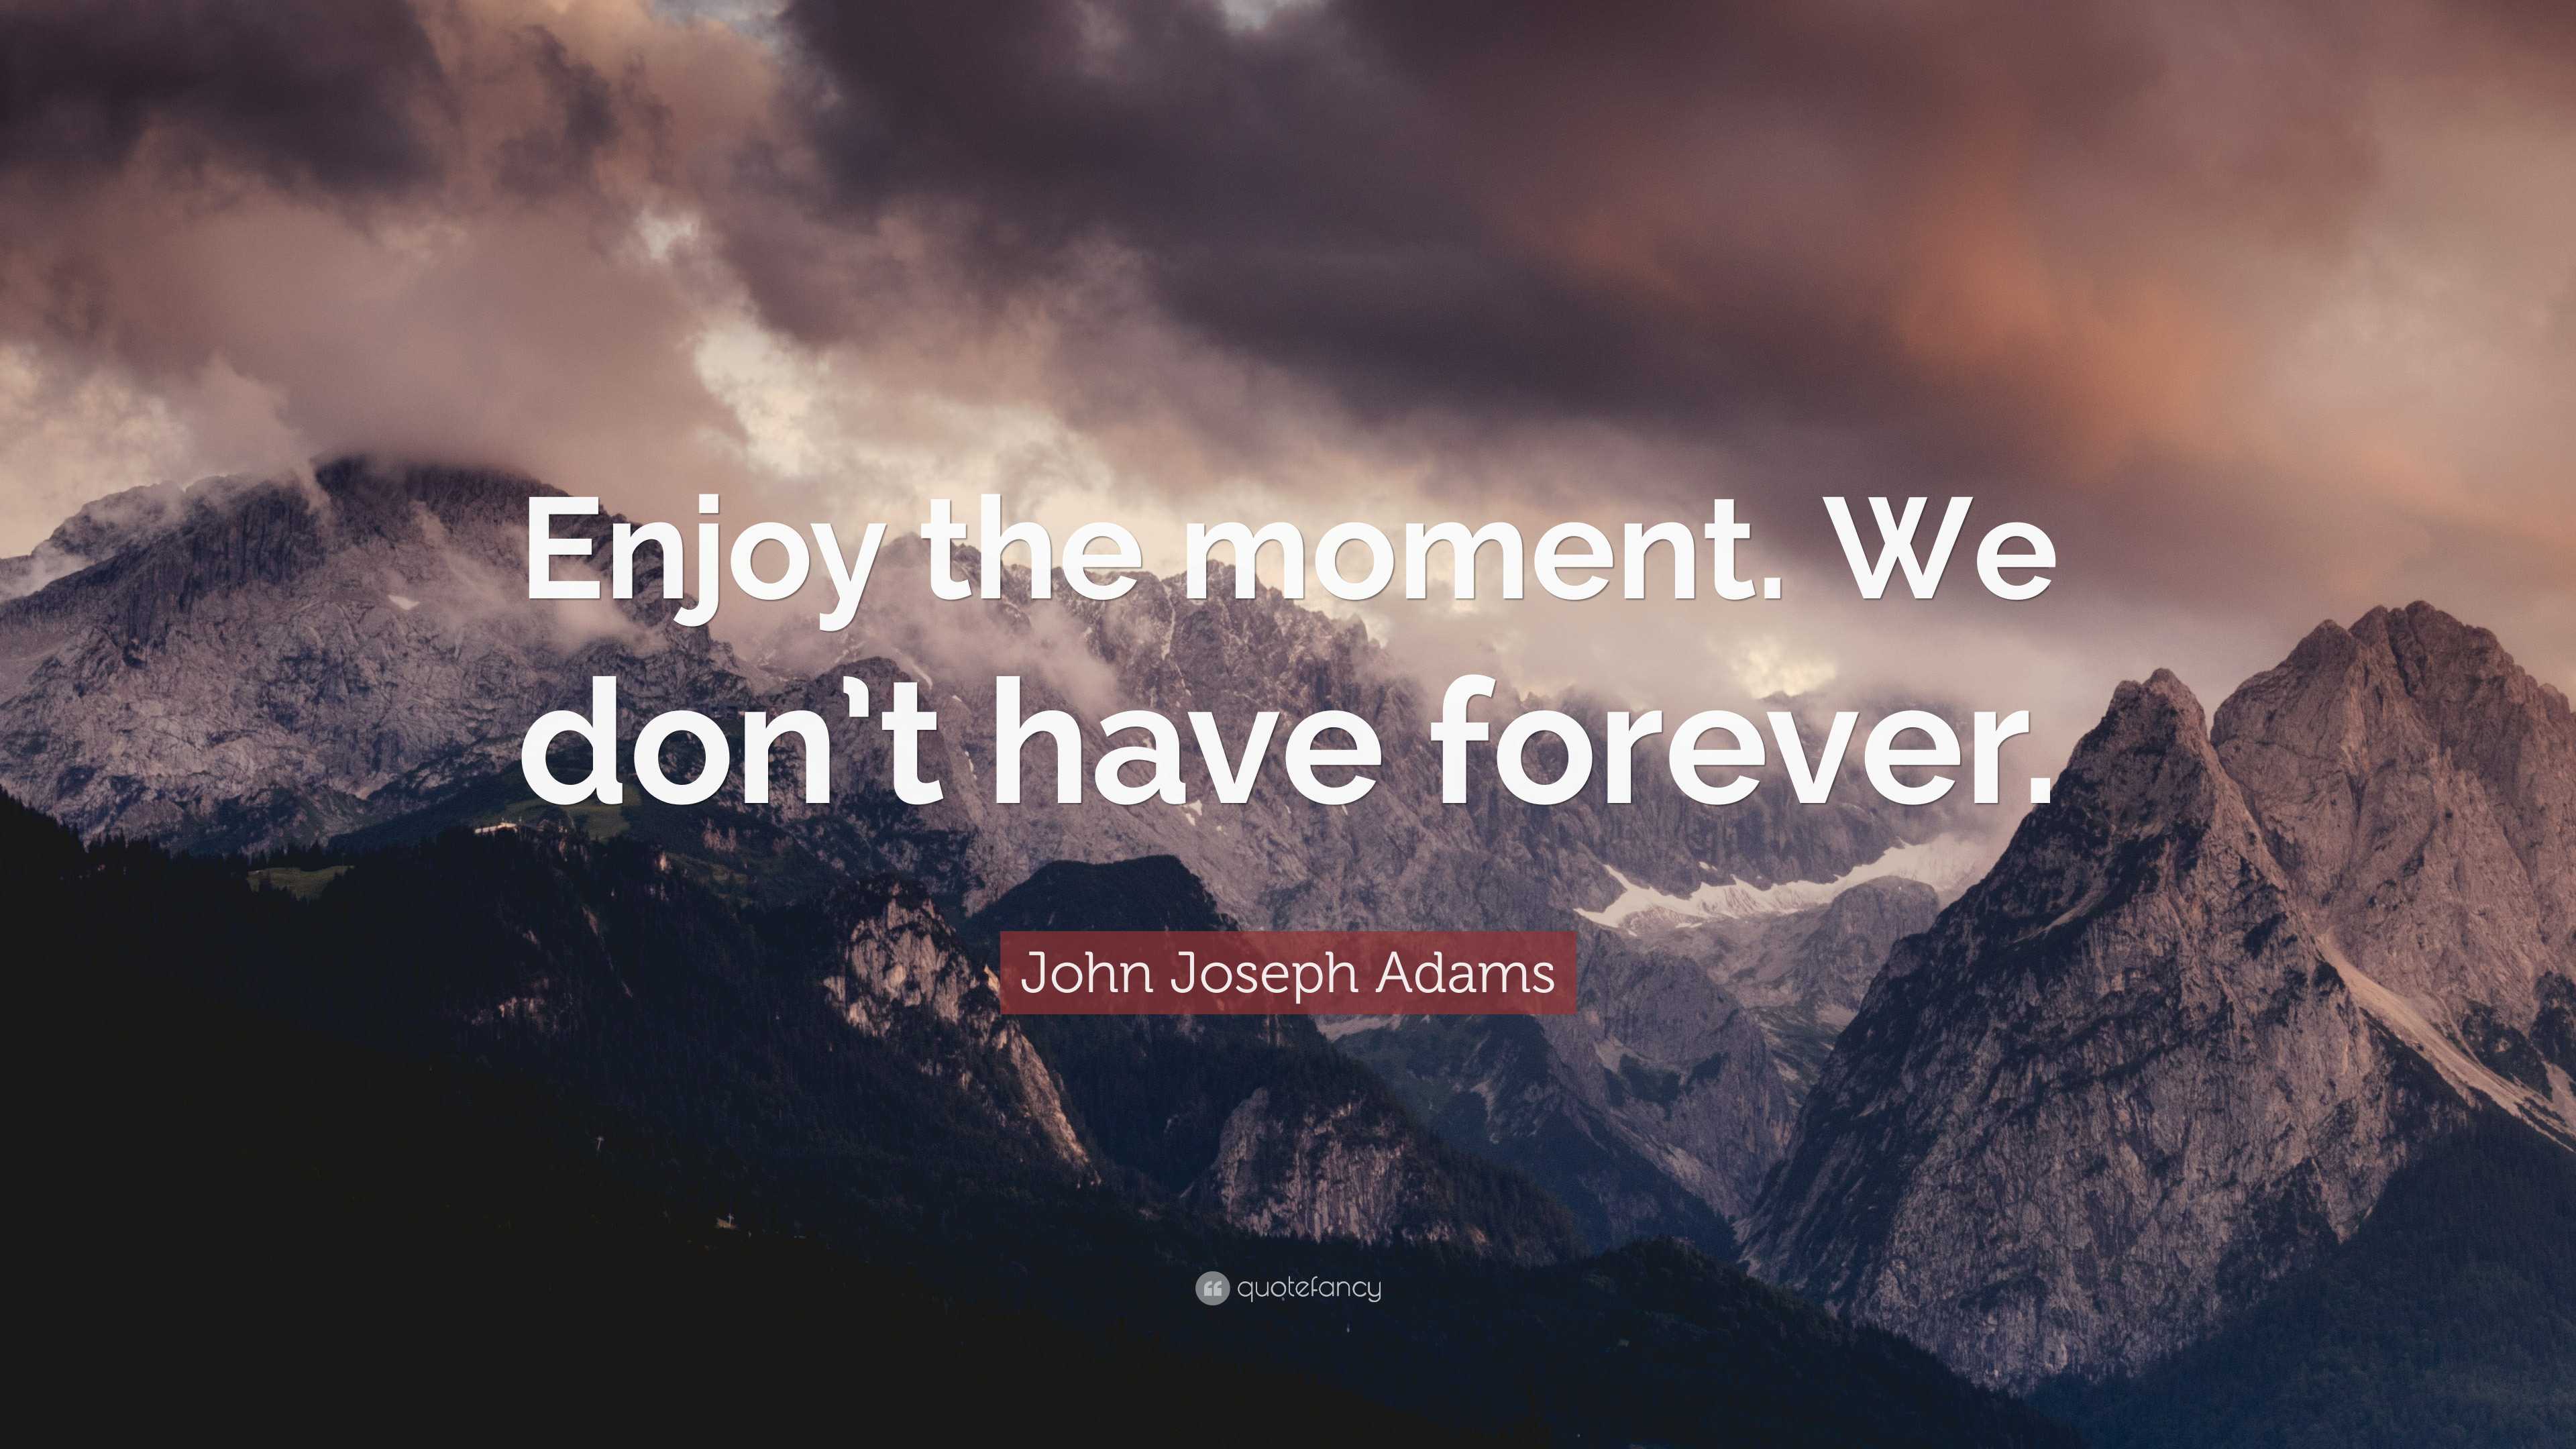 John Joseph Adams Quote: “Enjoy the moment. We don't have forever.”